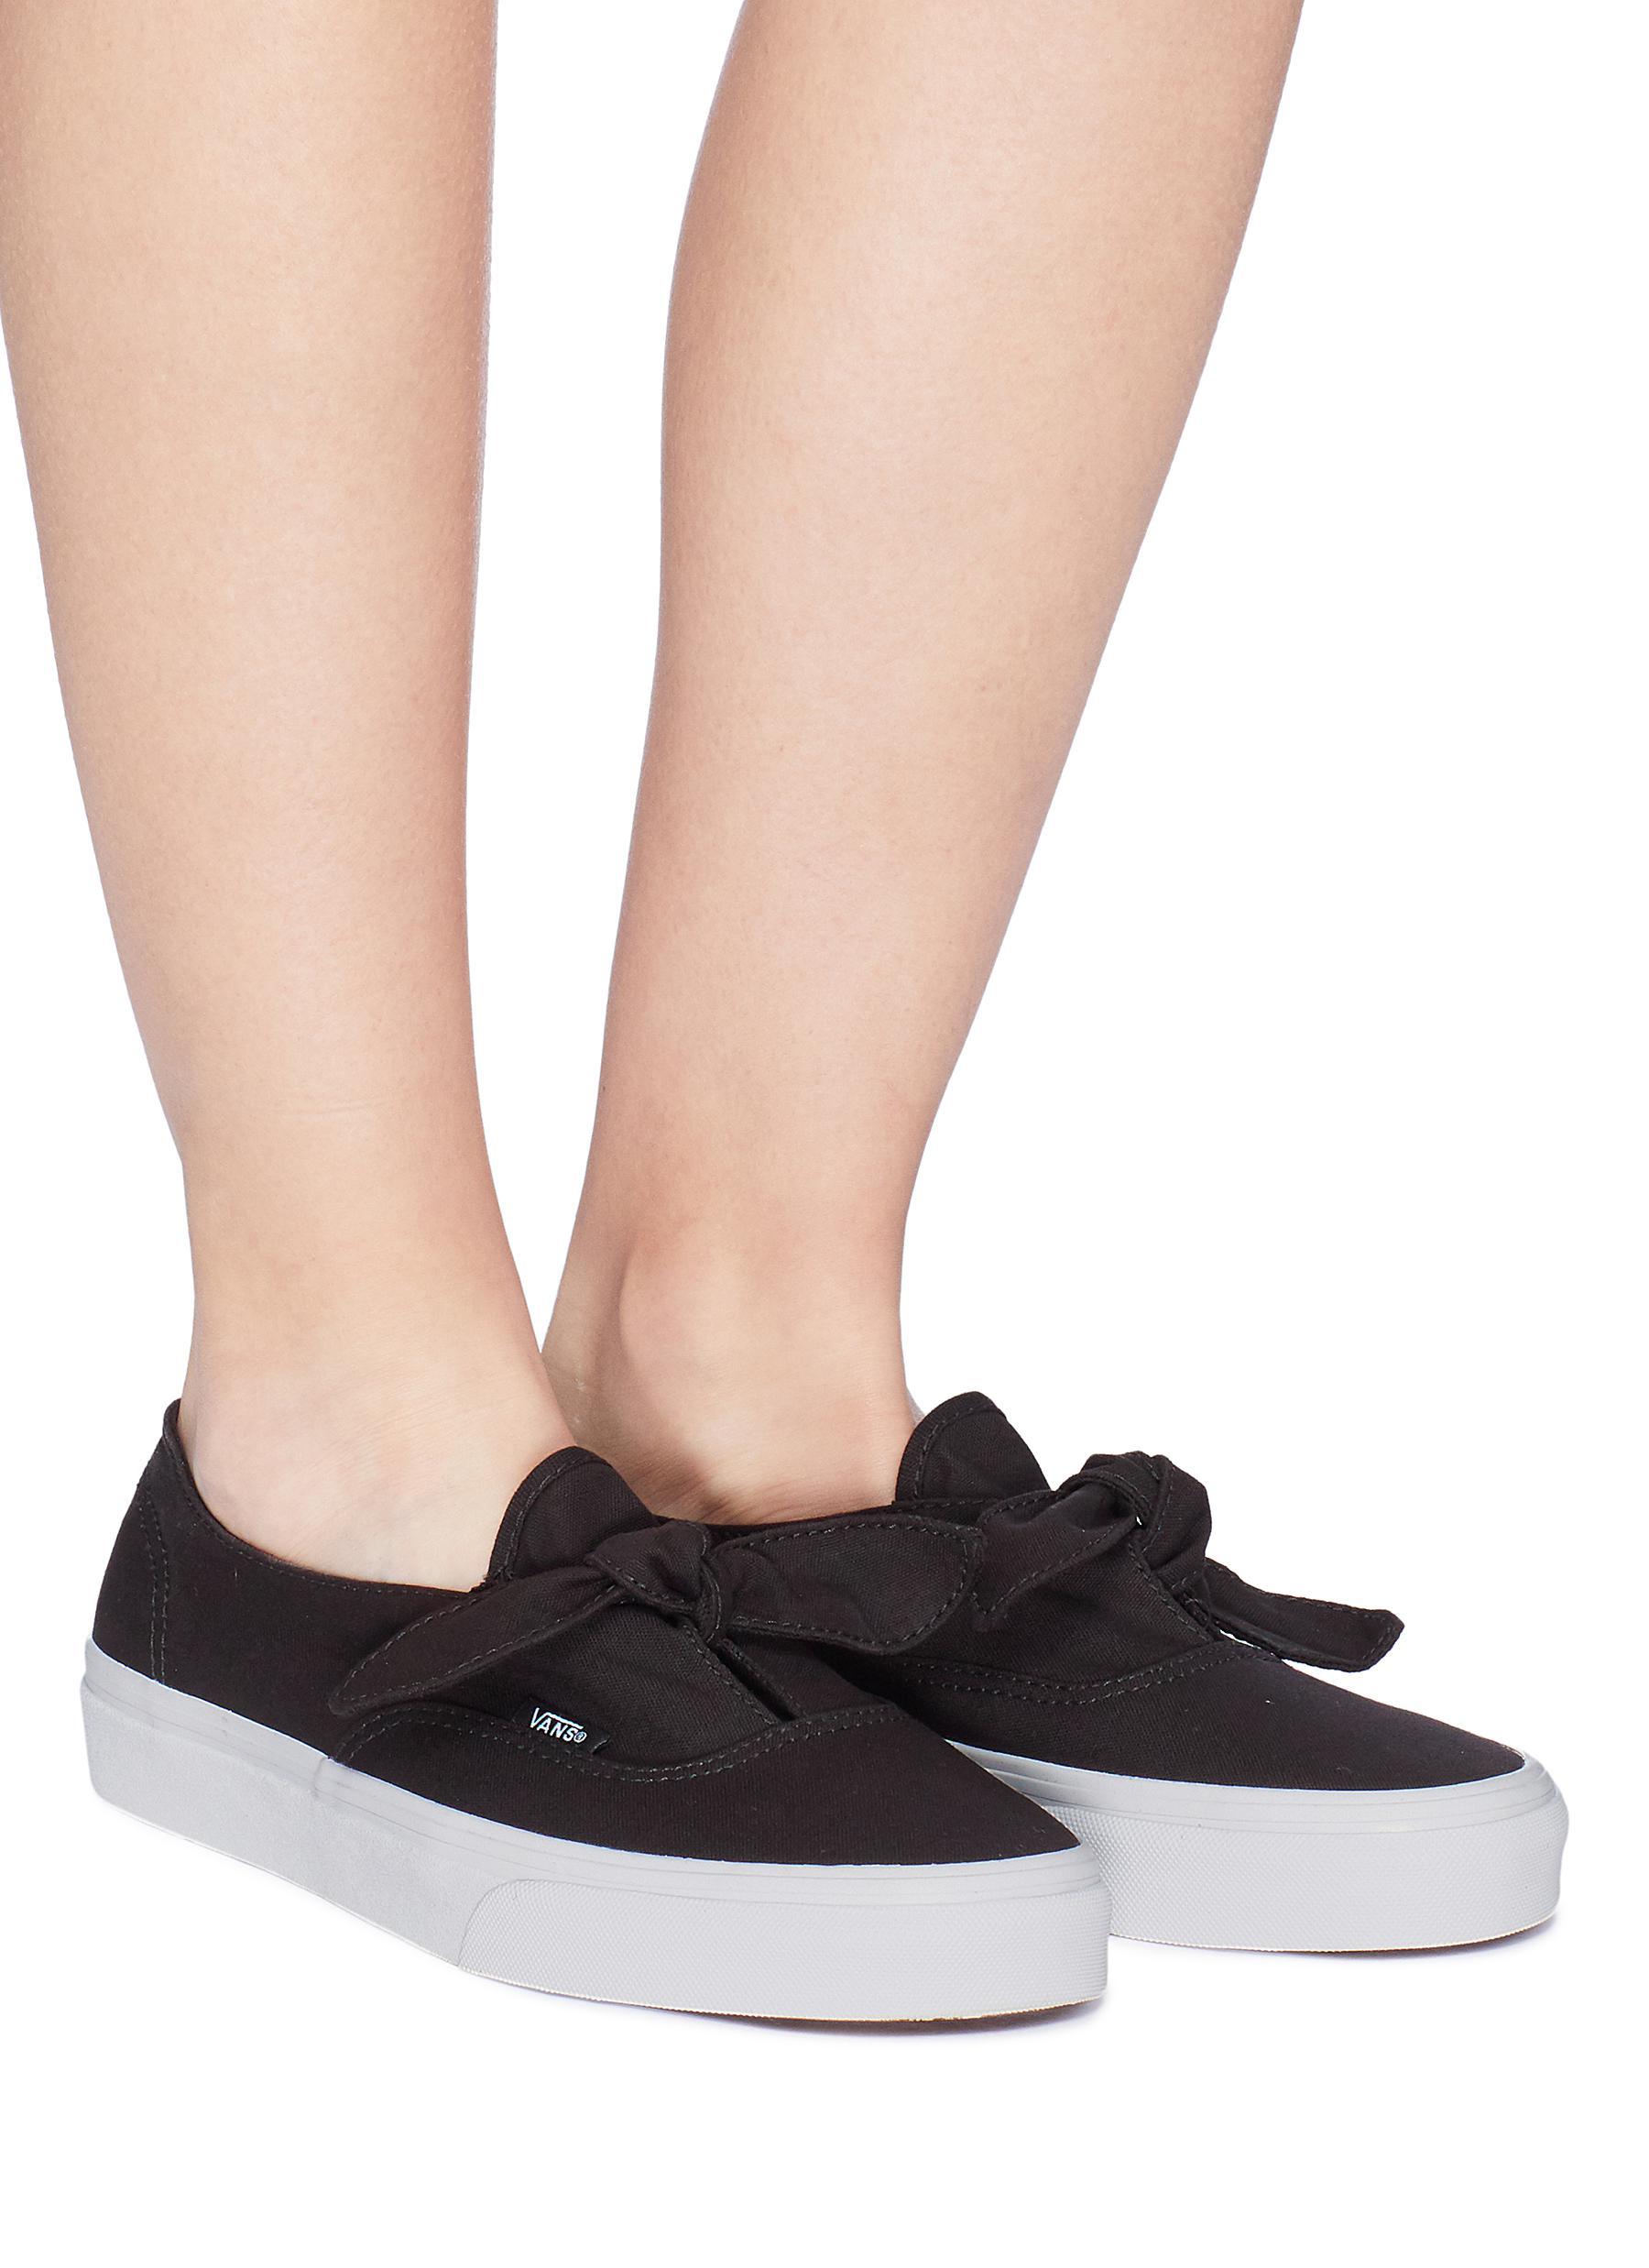 Vans 'authentic Knotted' Canvas Skate Slip-ons in Black - Lyst